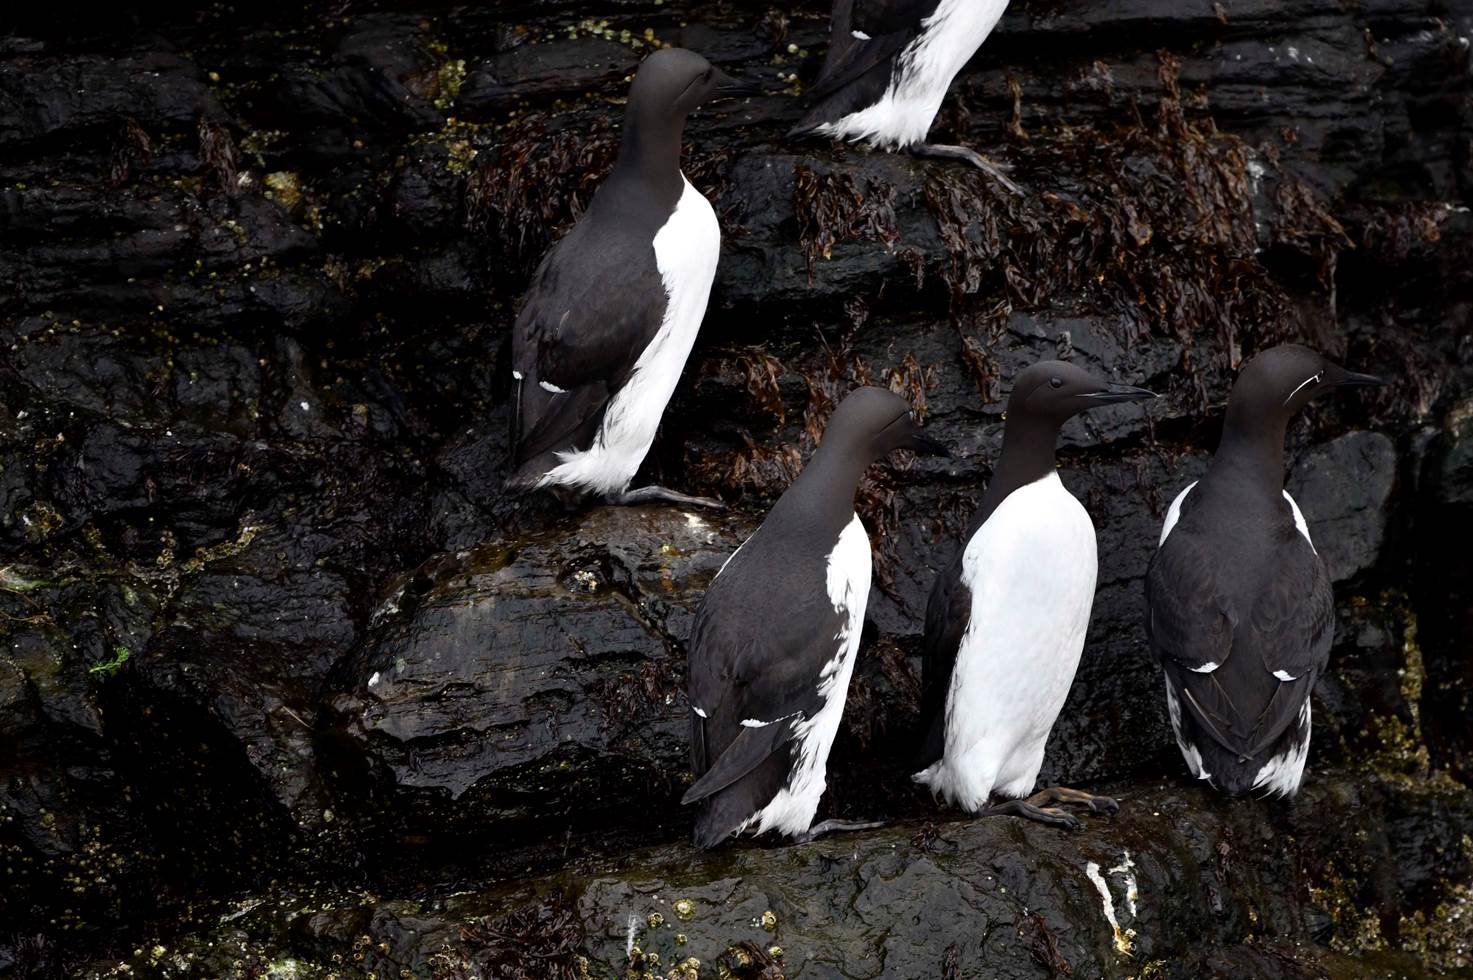 A group of penguins on a rock

Description automatically generated with medium confidence